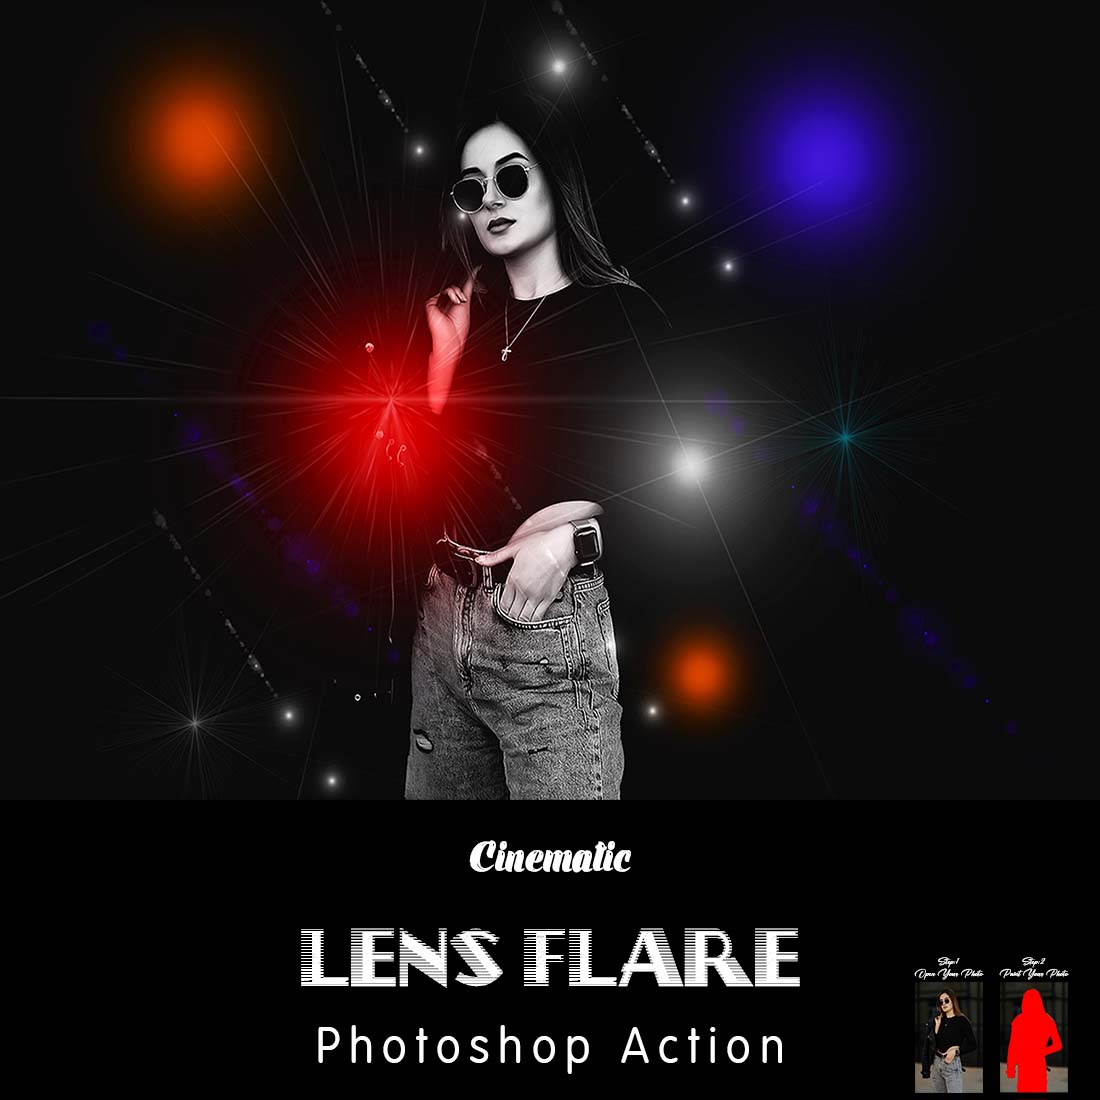 Cinematic Lens Flare Photoshop Action cover image.